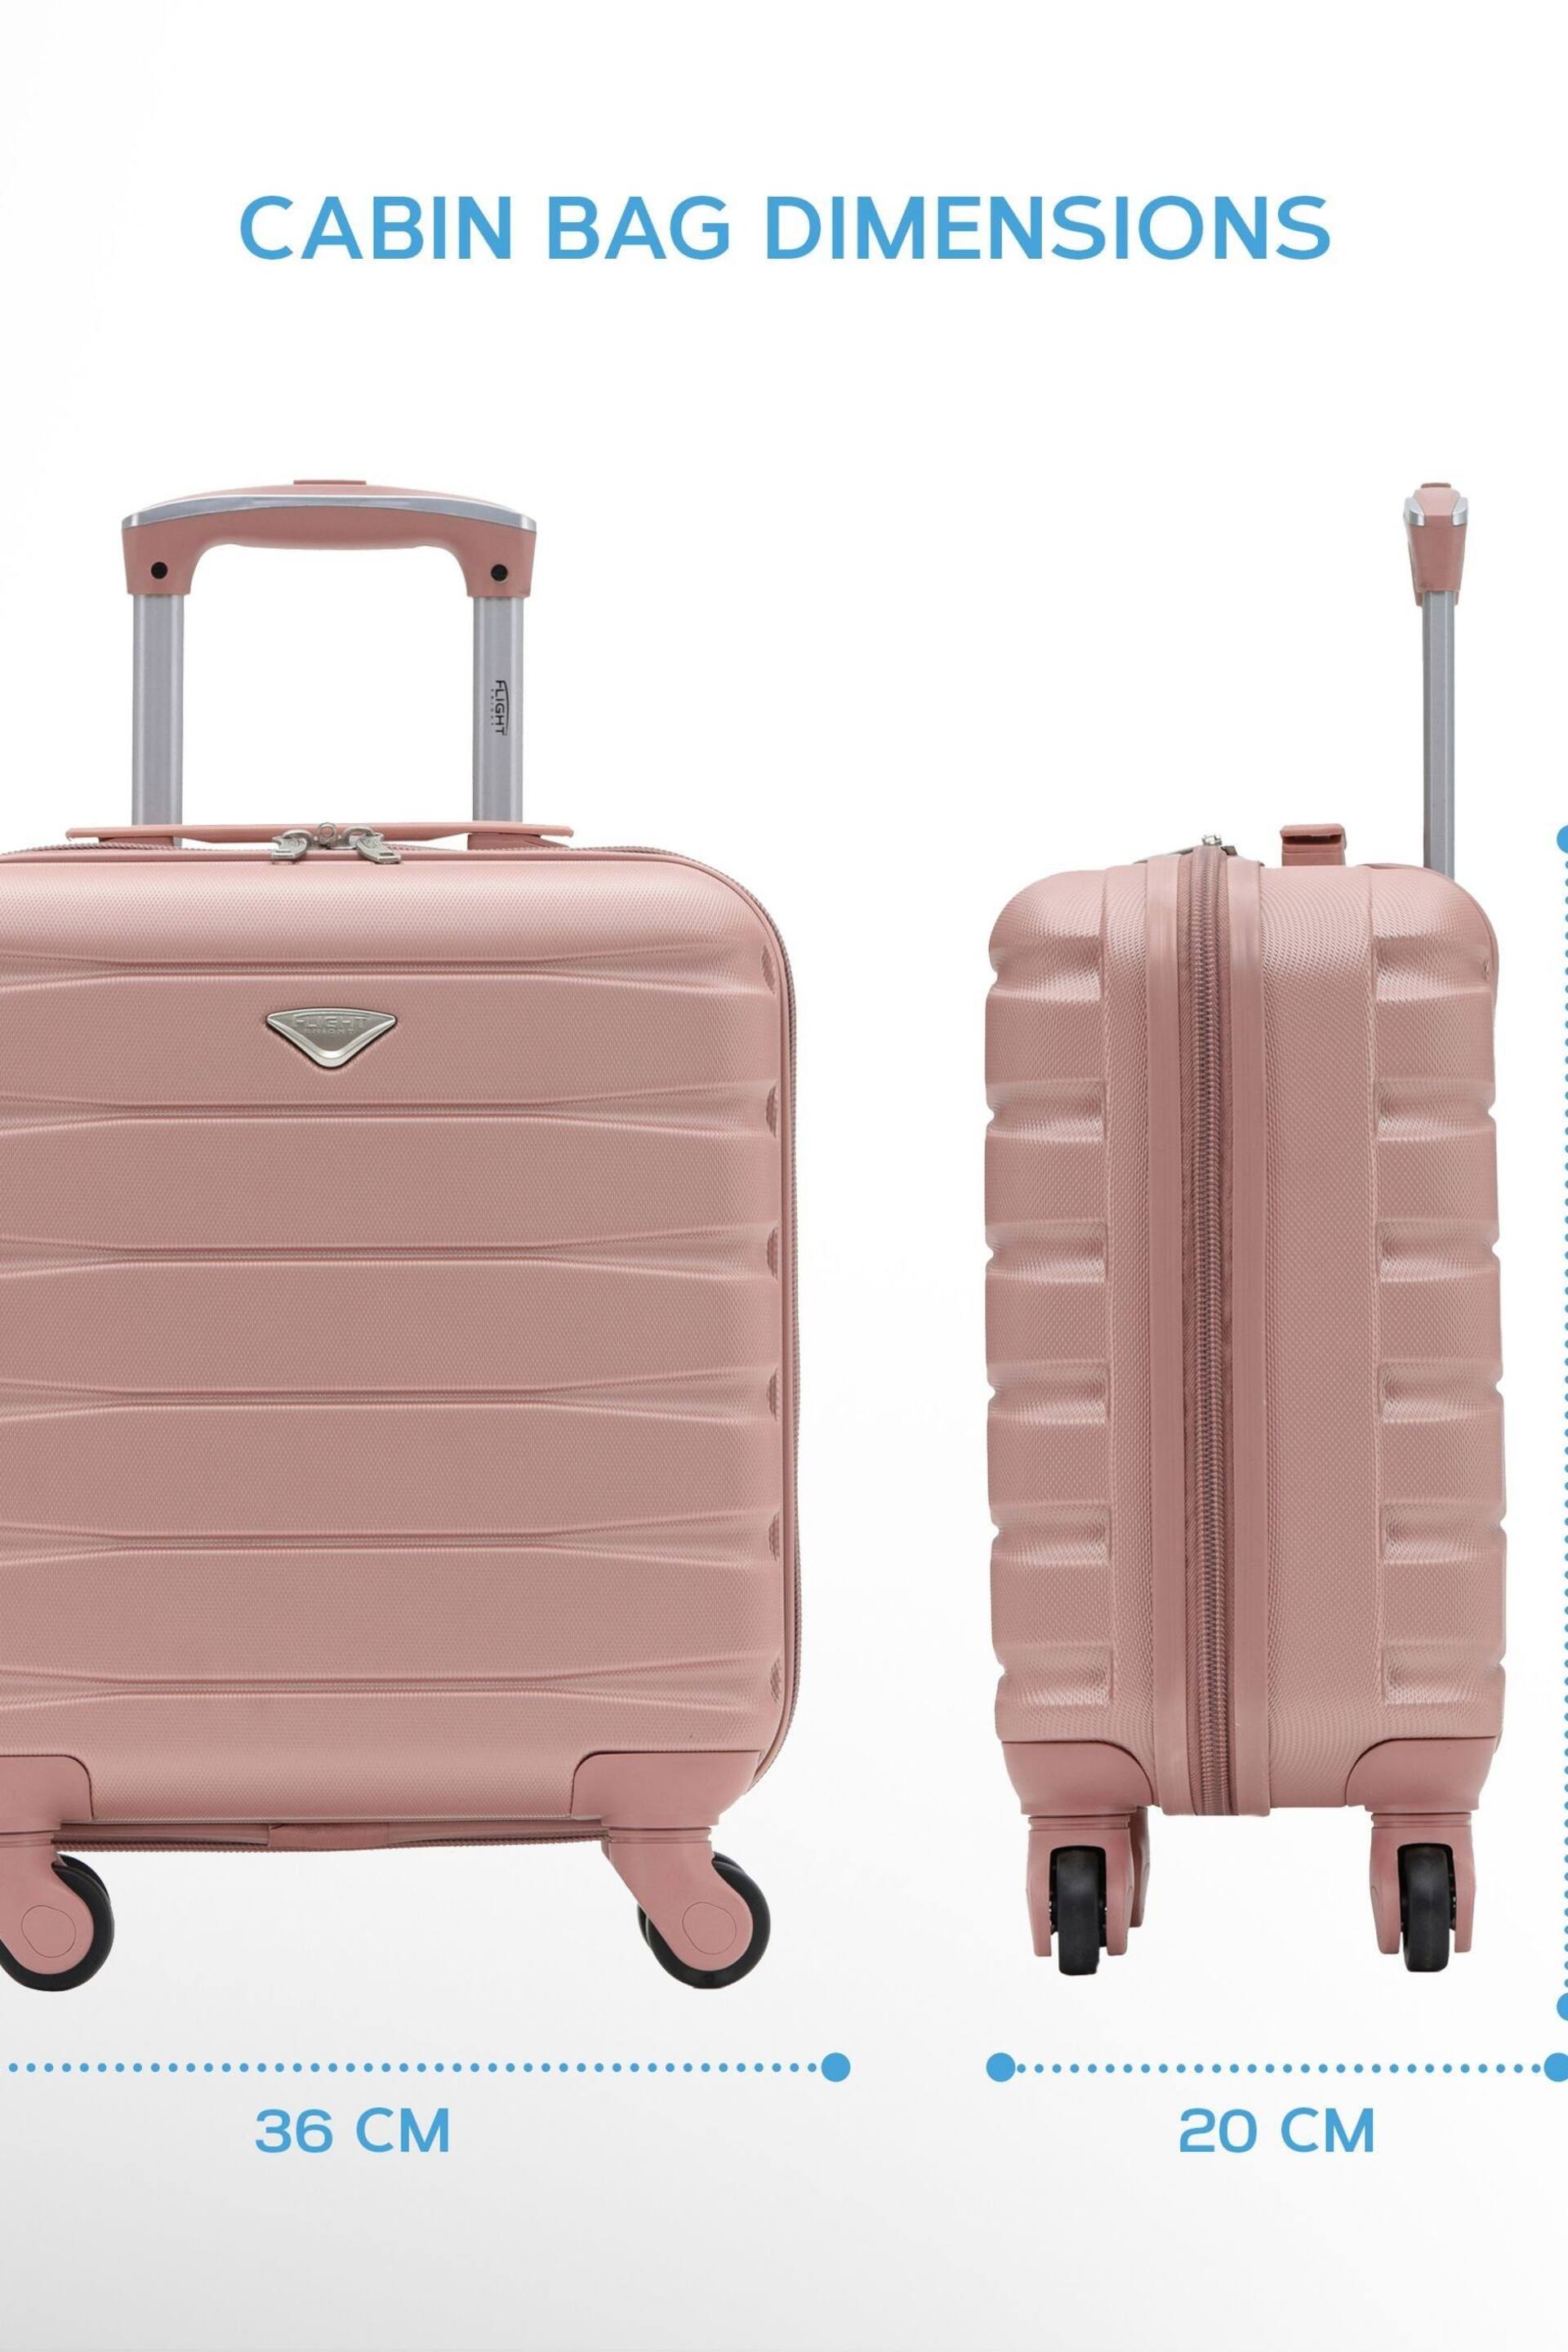 Flight Knight EasyJet Underseat 45x36x20cm 4 Wheel ABS Hard Case Cabin Carry On Suitcase Set Of 2 - Image 8 of 9